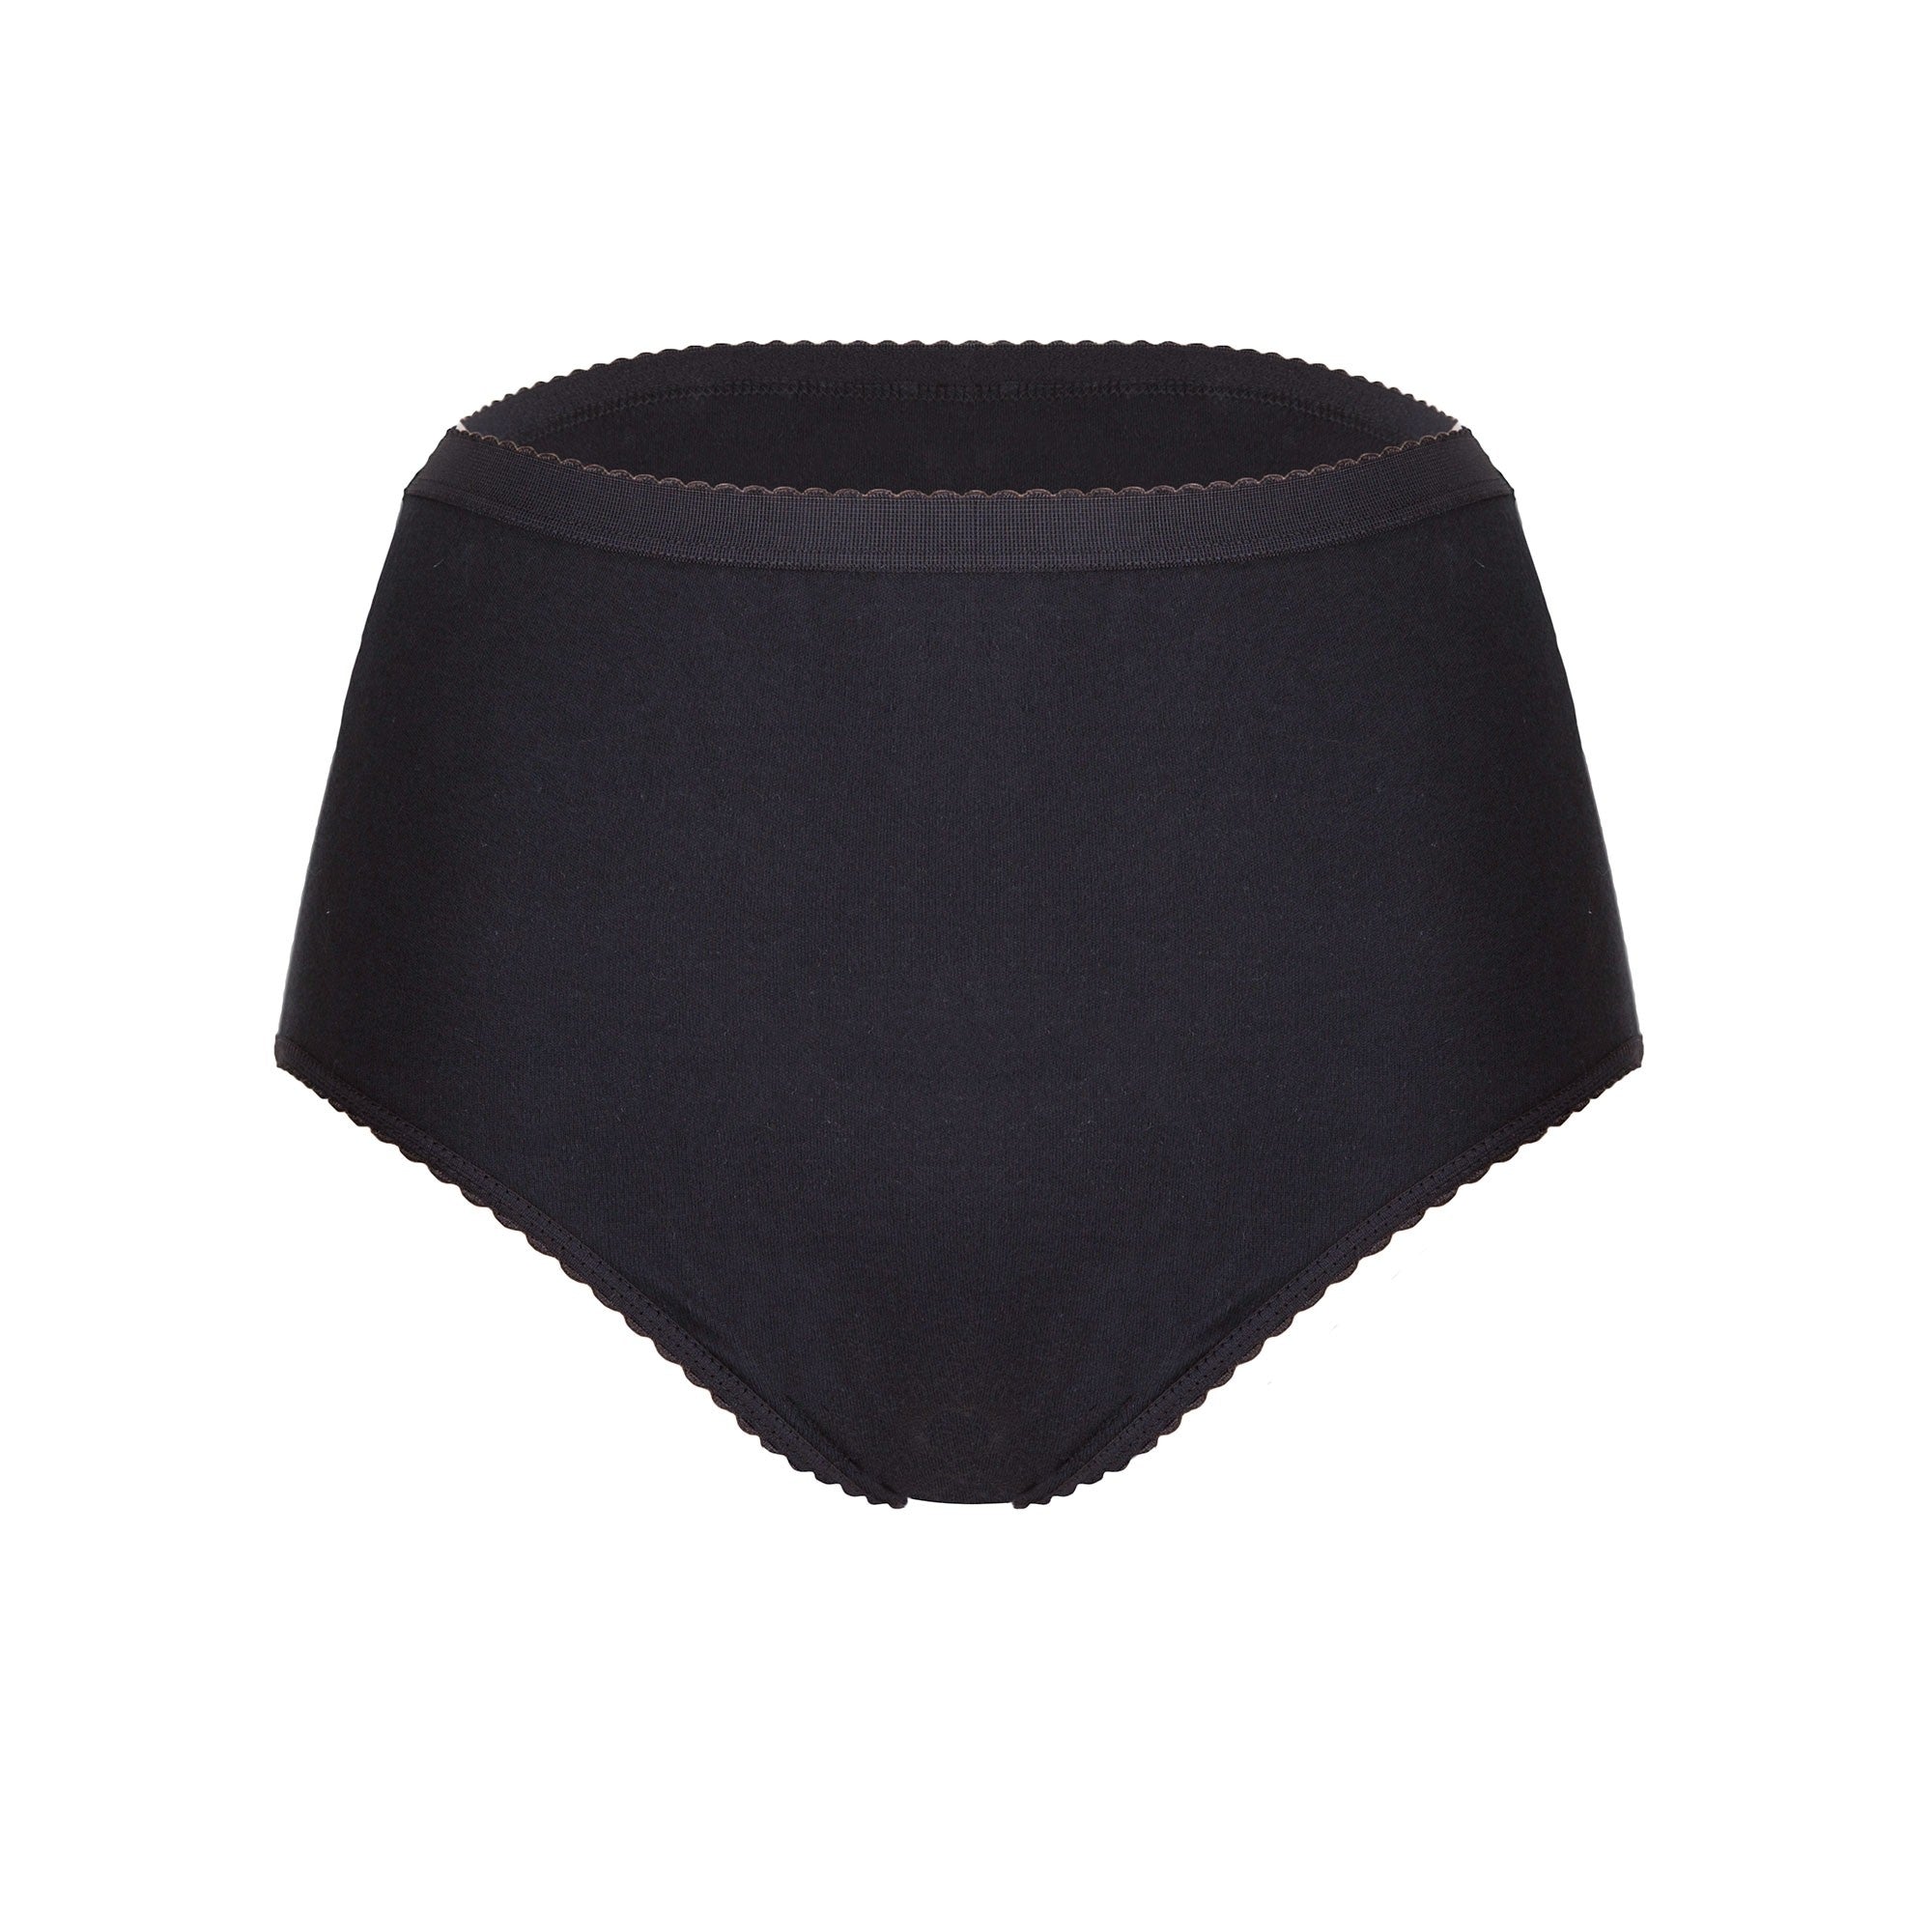 Cotton Ladies Brief Super Absorbency with Waterproof Backing-Black -  National Incontinence